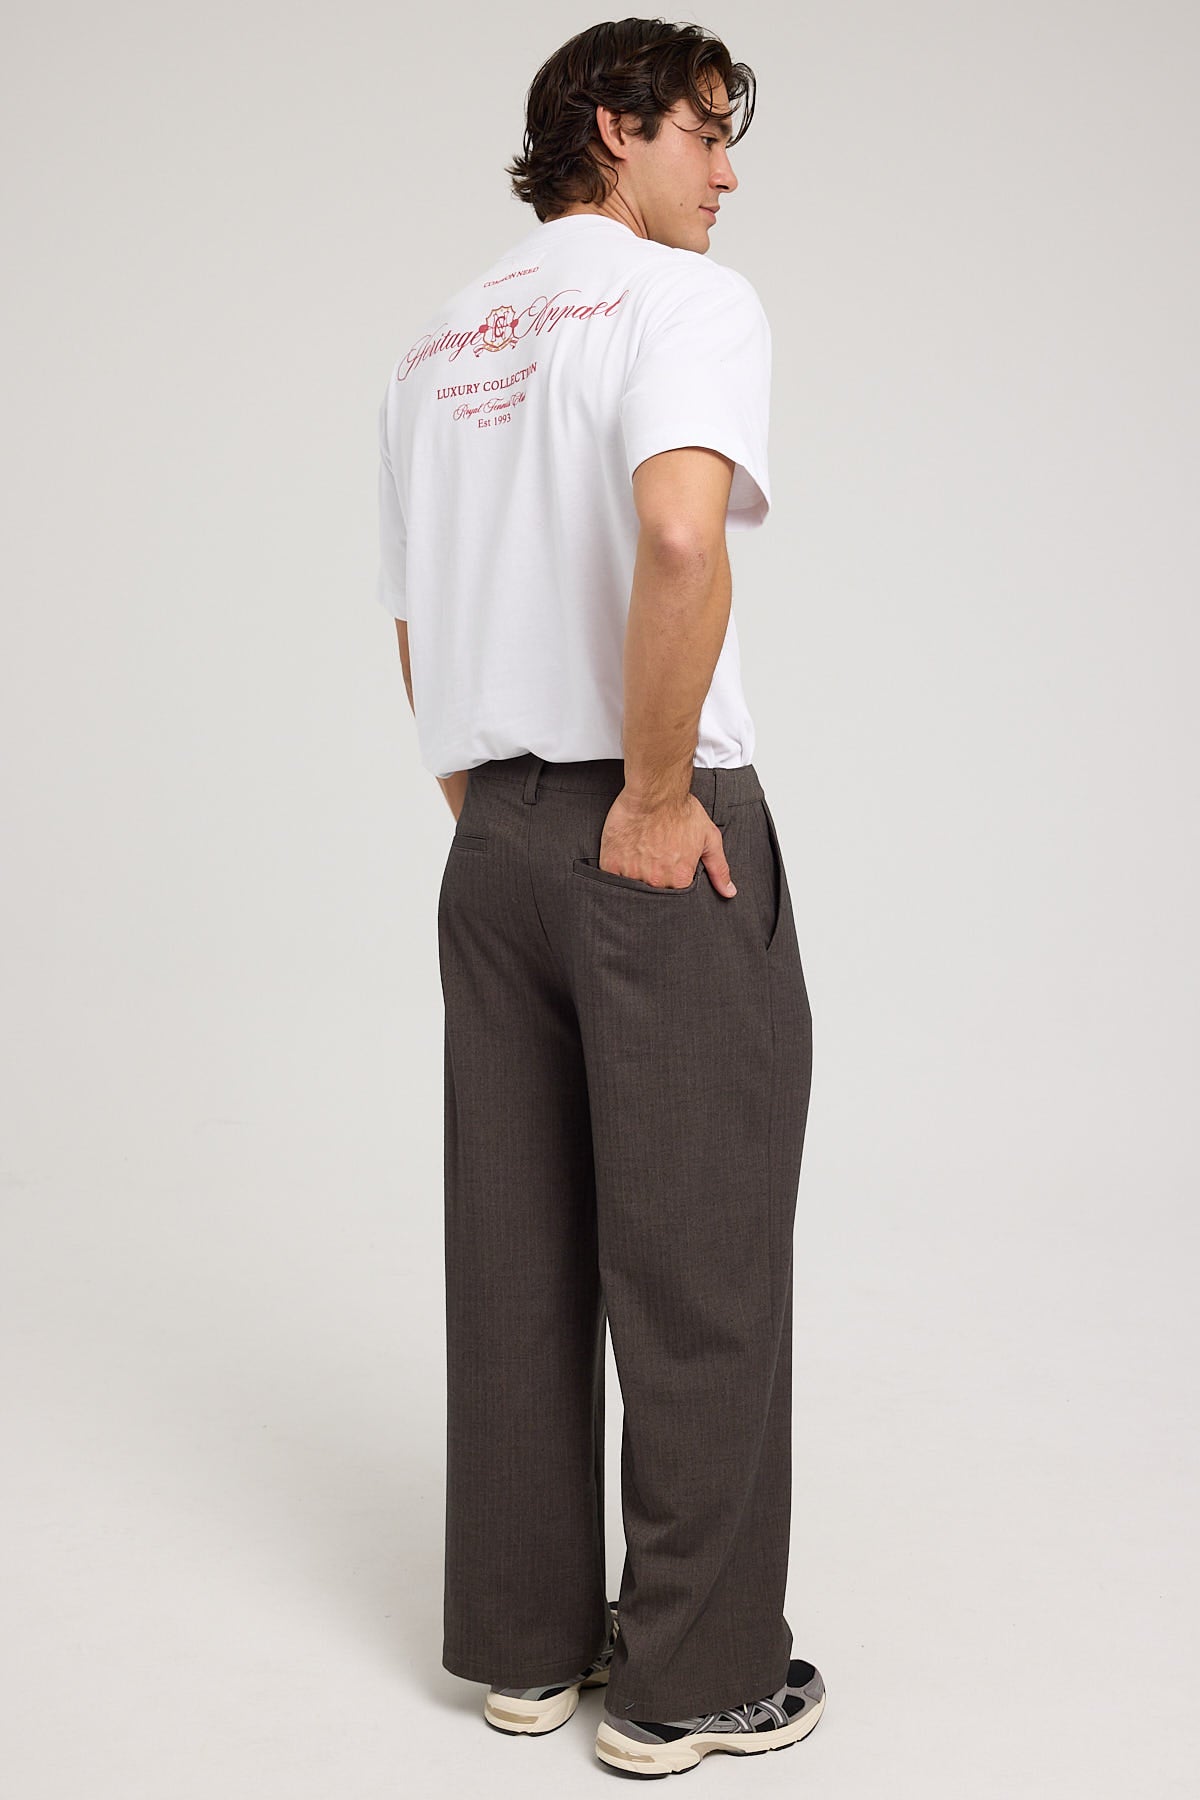 Common Need Lenny Tailored Pant Grey